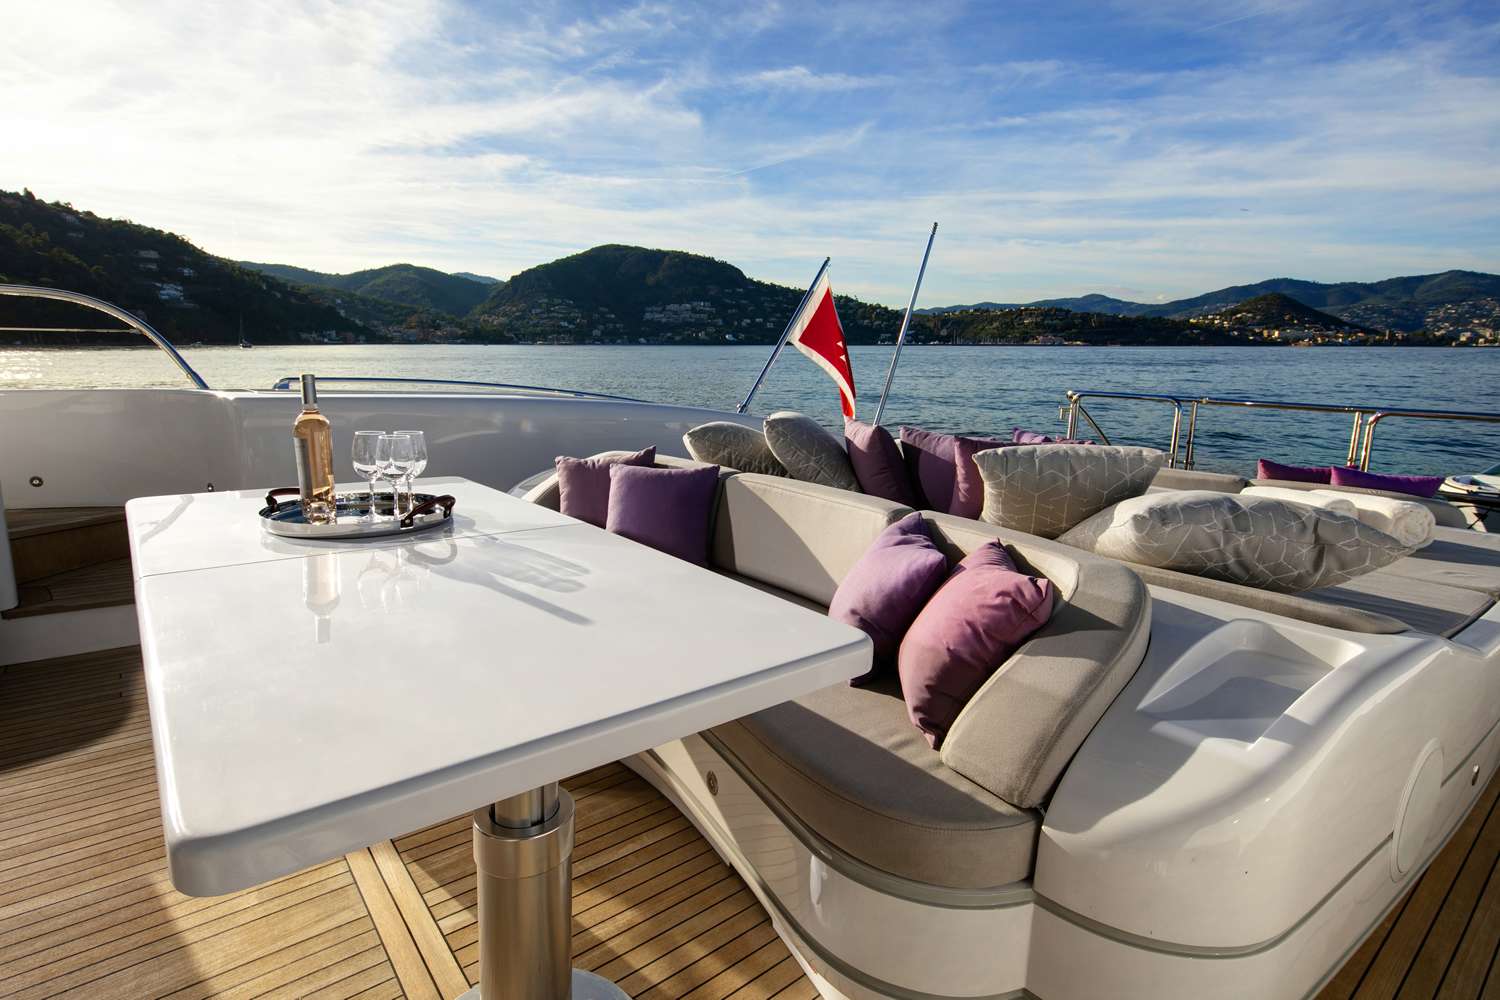 Bo - Yacht Charter Cannes & Boat hire in Fr. Riviera, Corsica & Sardinia 5